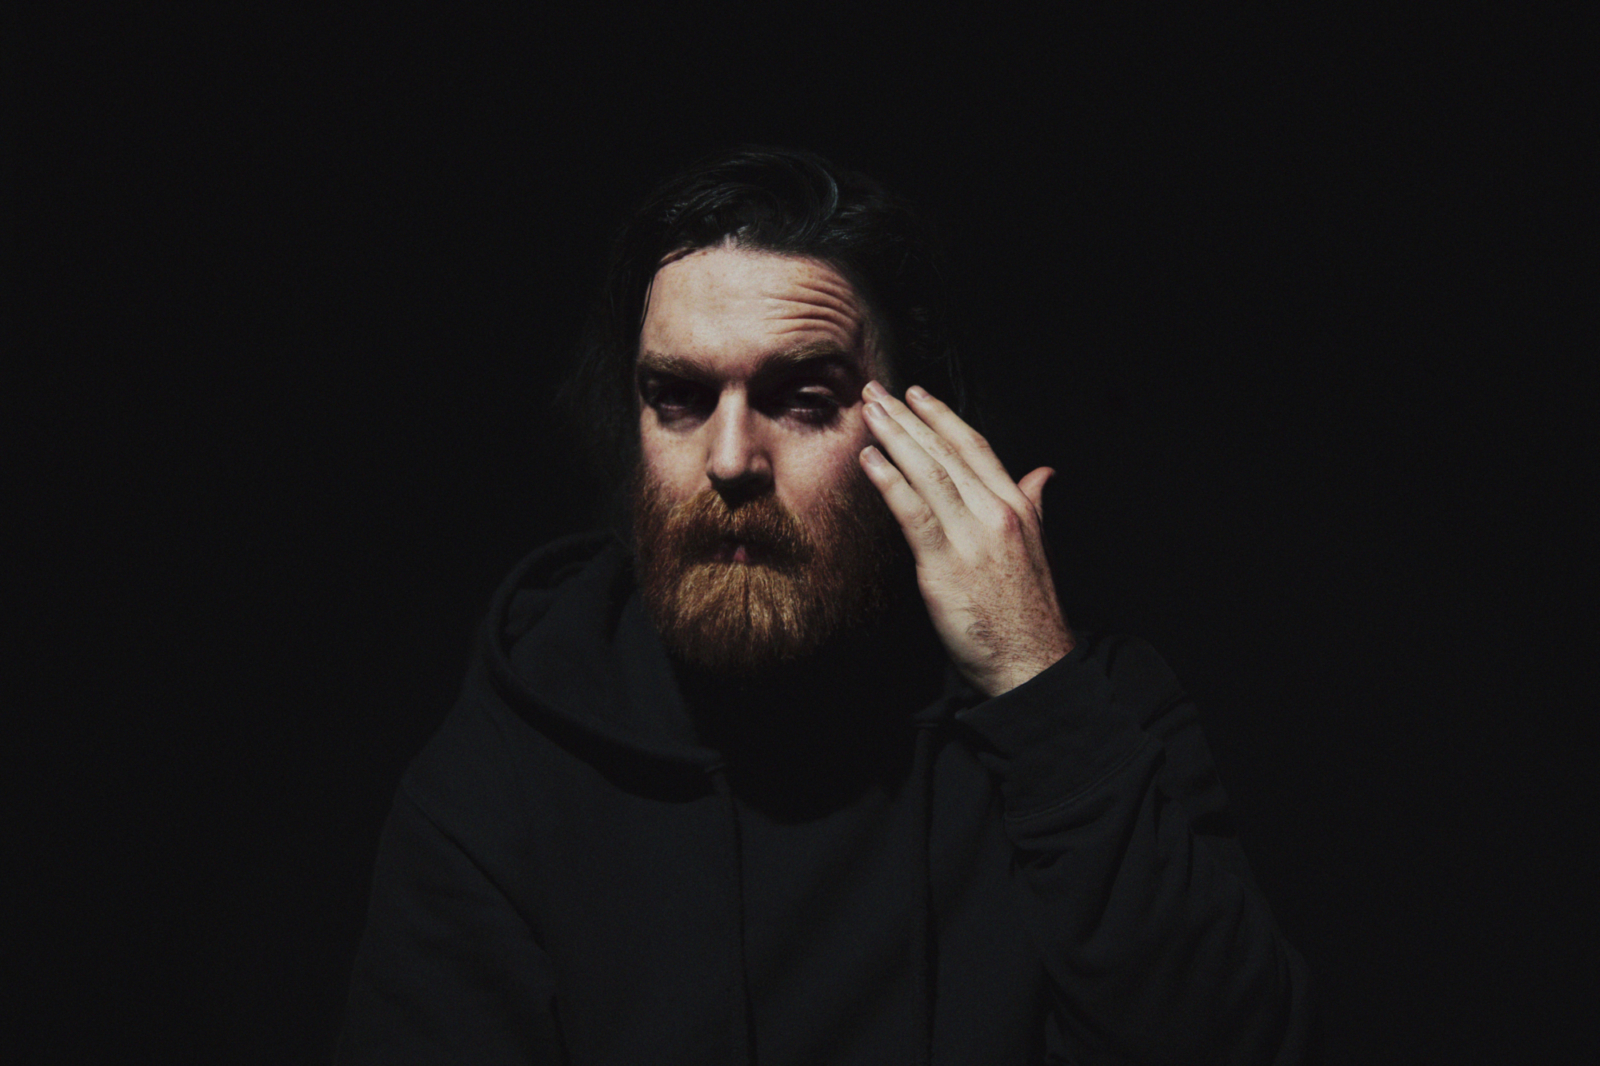 Nick Murphy airs live version of ‘Message You At Midnight’